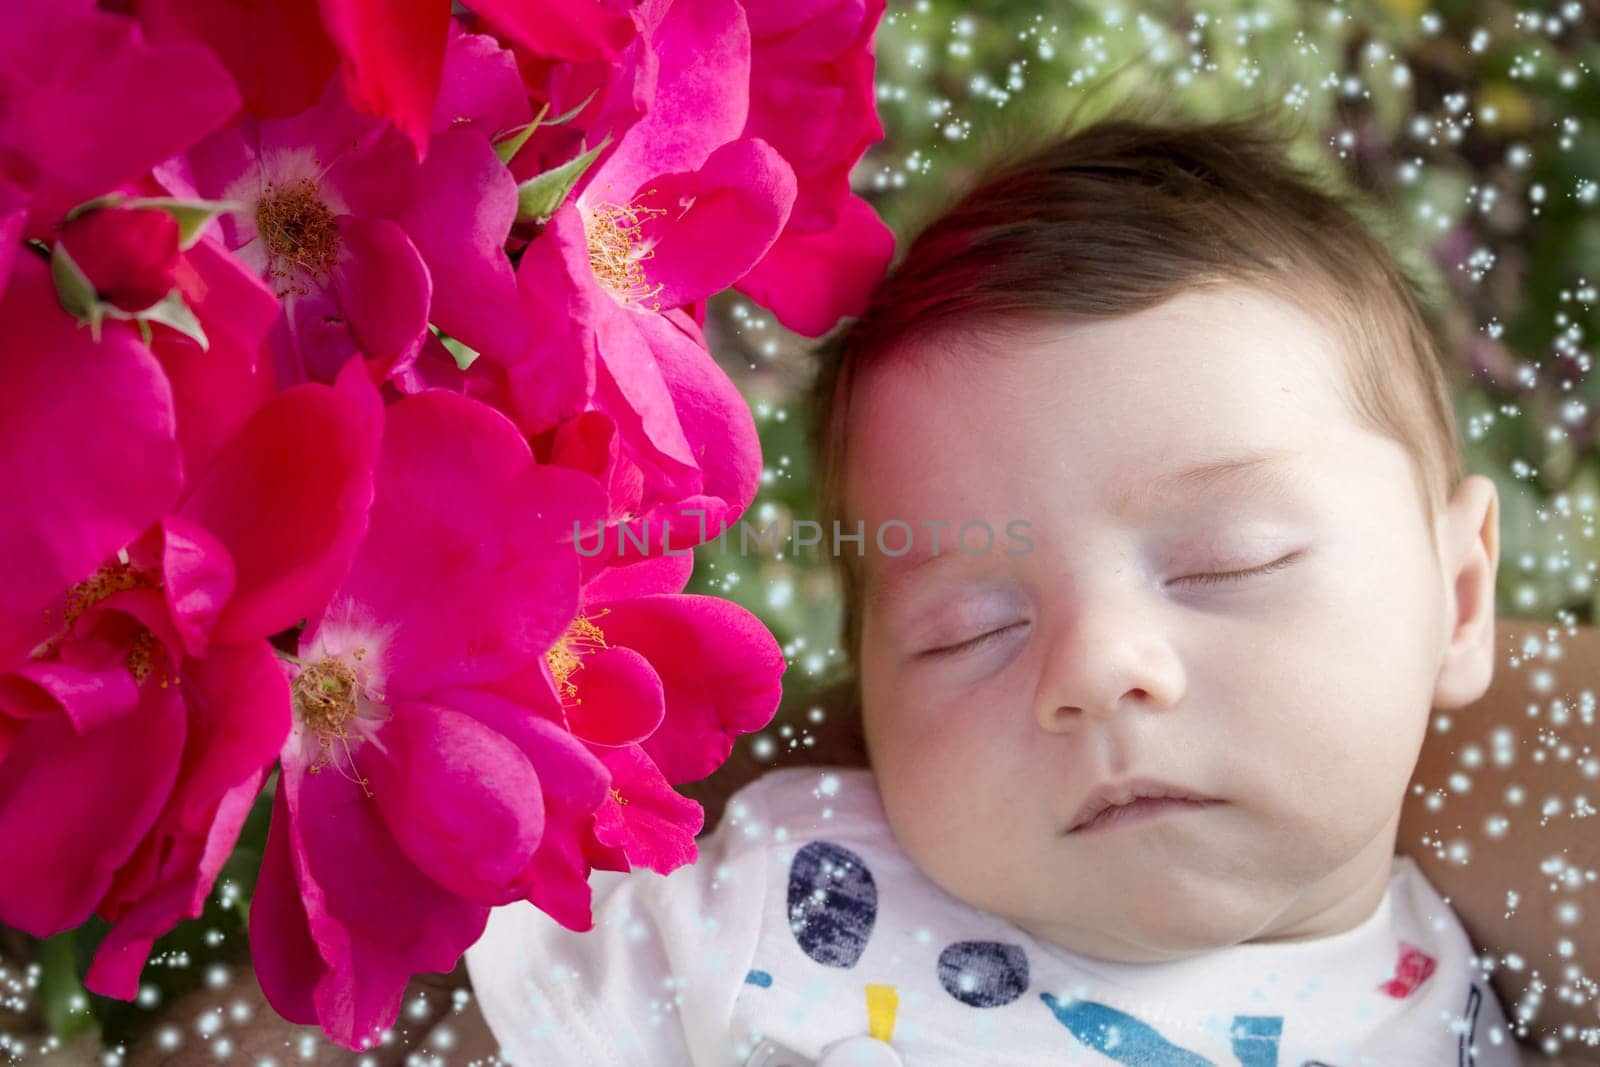 Sleeping baby surrounded by pink flowers by GemaIbarra